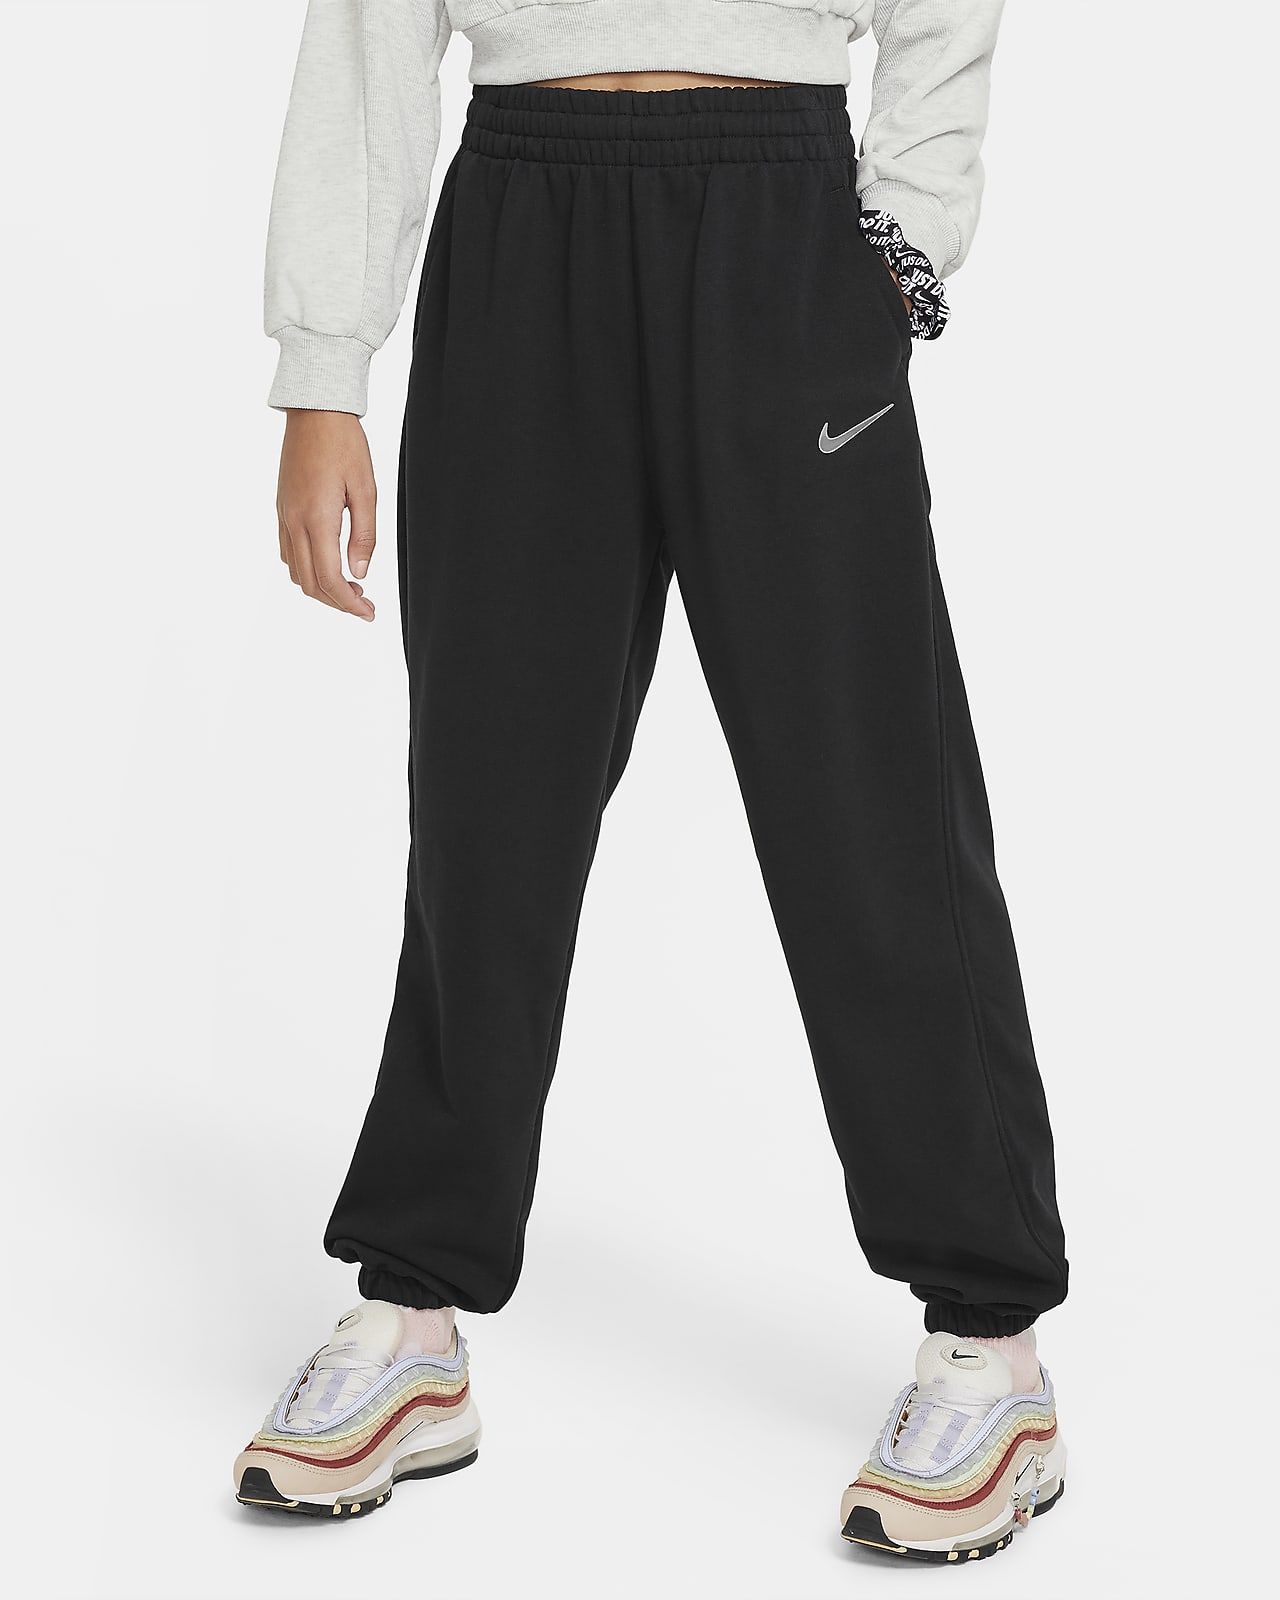 https://static.nike.com/a/images/t_PDP_1280_v1/f_auto,q_auto:eco/a4664fa9-60e8-472c-a34c-b7e899546869/sportswear-older-dri-fit-loose-fleece-joggers-NLNgzh.png